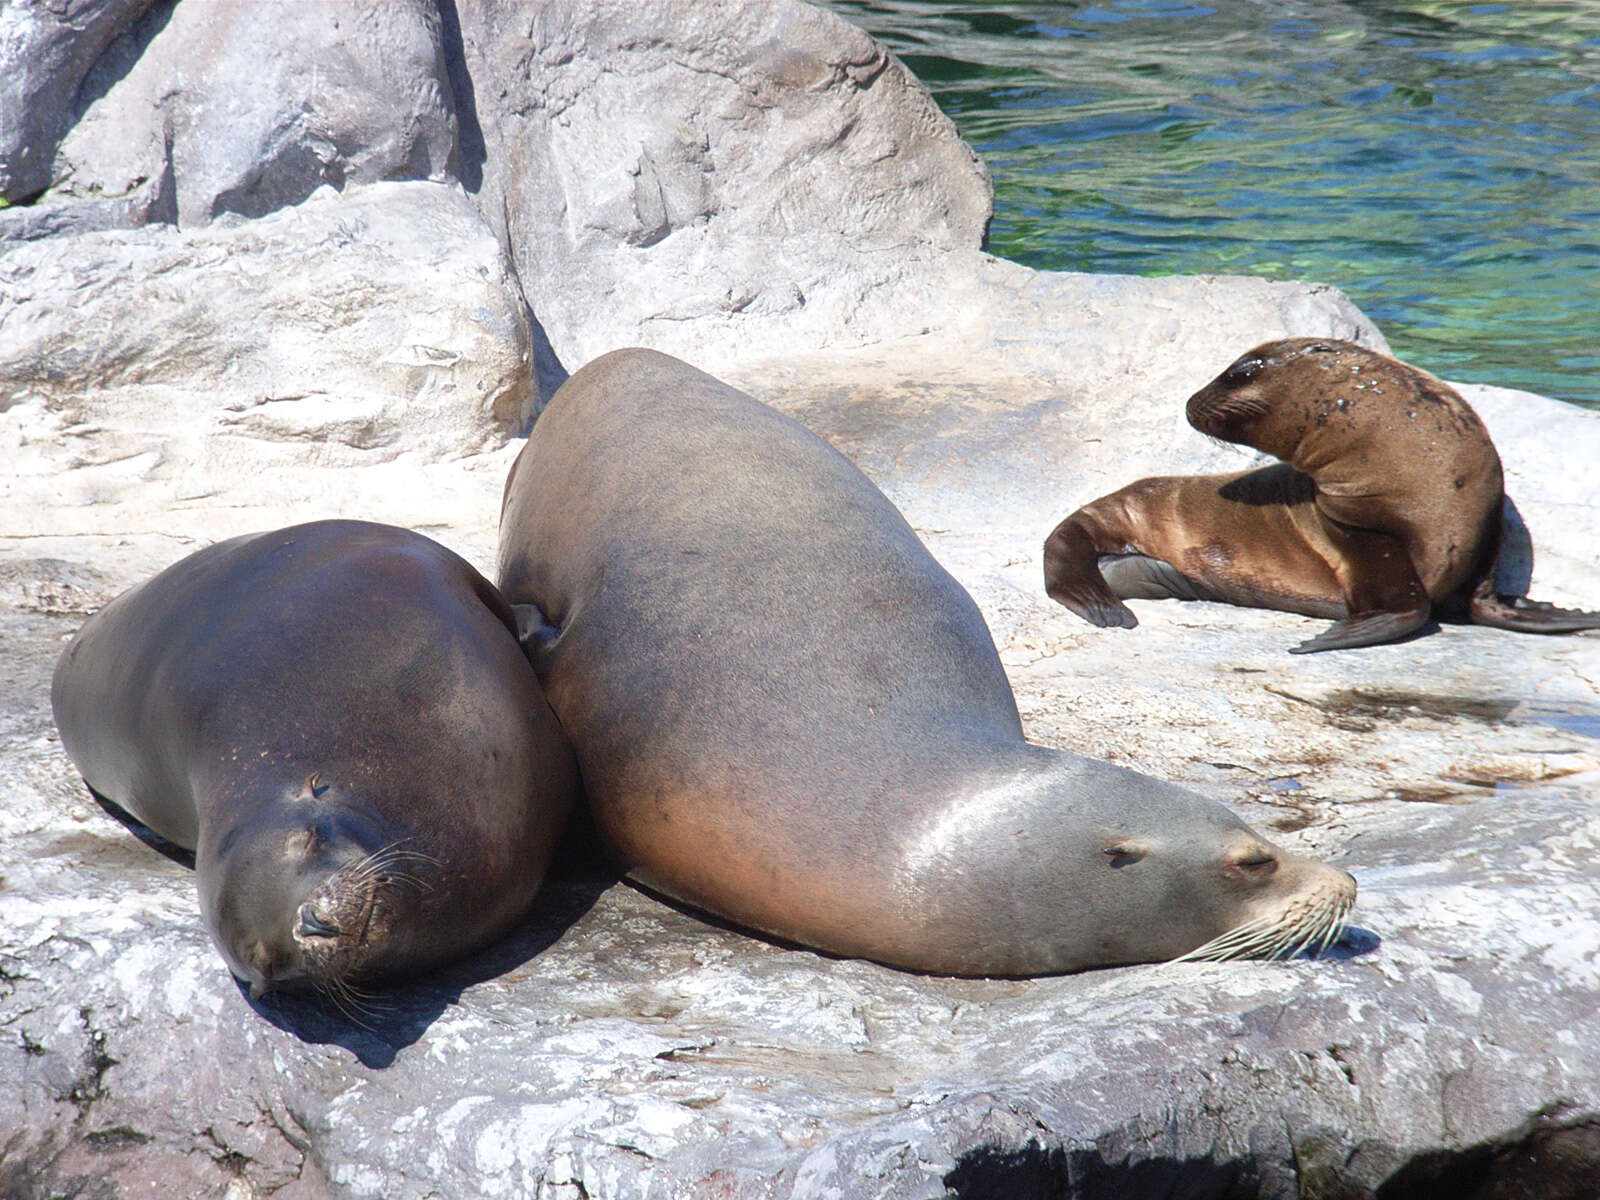 Image of eared seals